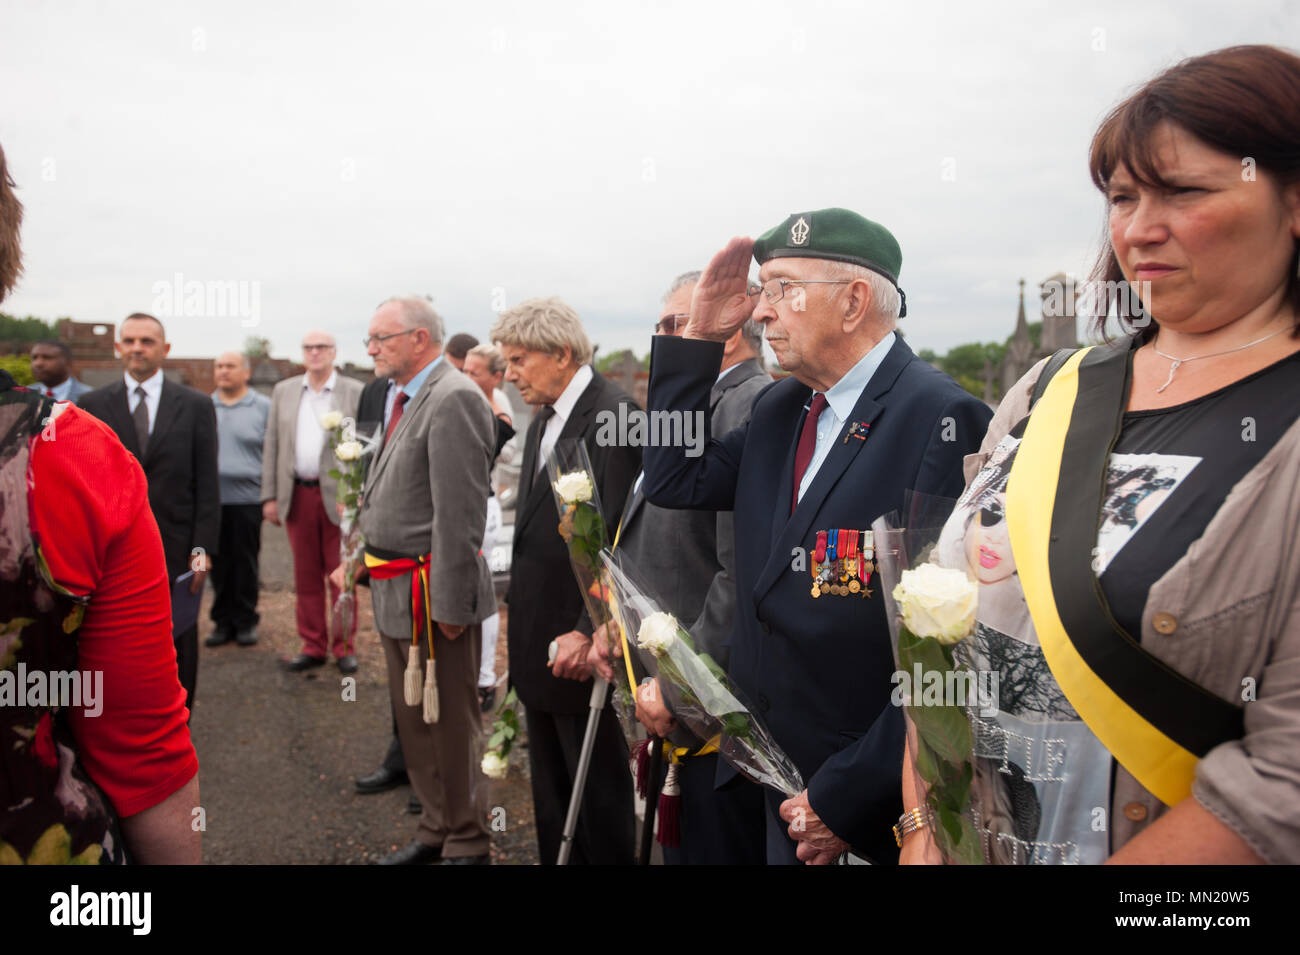 Participants pay respects during a memorial ceremony at Belgian Lt. Col. Joseph Daumerie's gravemarker, Aug. 15, 2017, Brugelette, Belgium.  The memorial commemorates the 75th anniversary of Daumerie's death. Daumerie is a war hero and fighter pilot who was executed in 1942 during World War II. The event offered a unique opportunity for the U.S. service members to honor a fallen hero and strengthen their relationship with NATO allies during the U.S. Army Garrison Benelux's 50th anniversary in Belgium. (U.S. Navy Photo by Information System Technician Seaman Daniel Gallegos/Released) Stock Photo